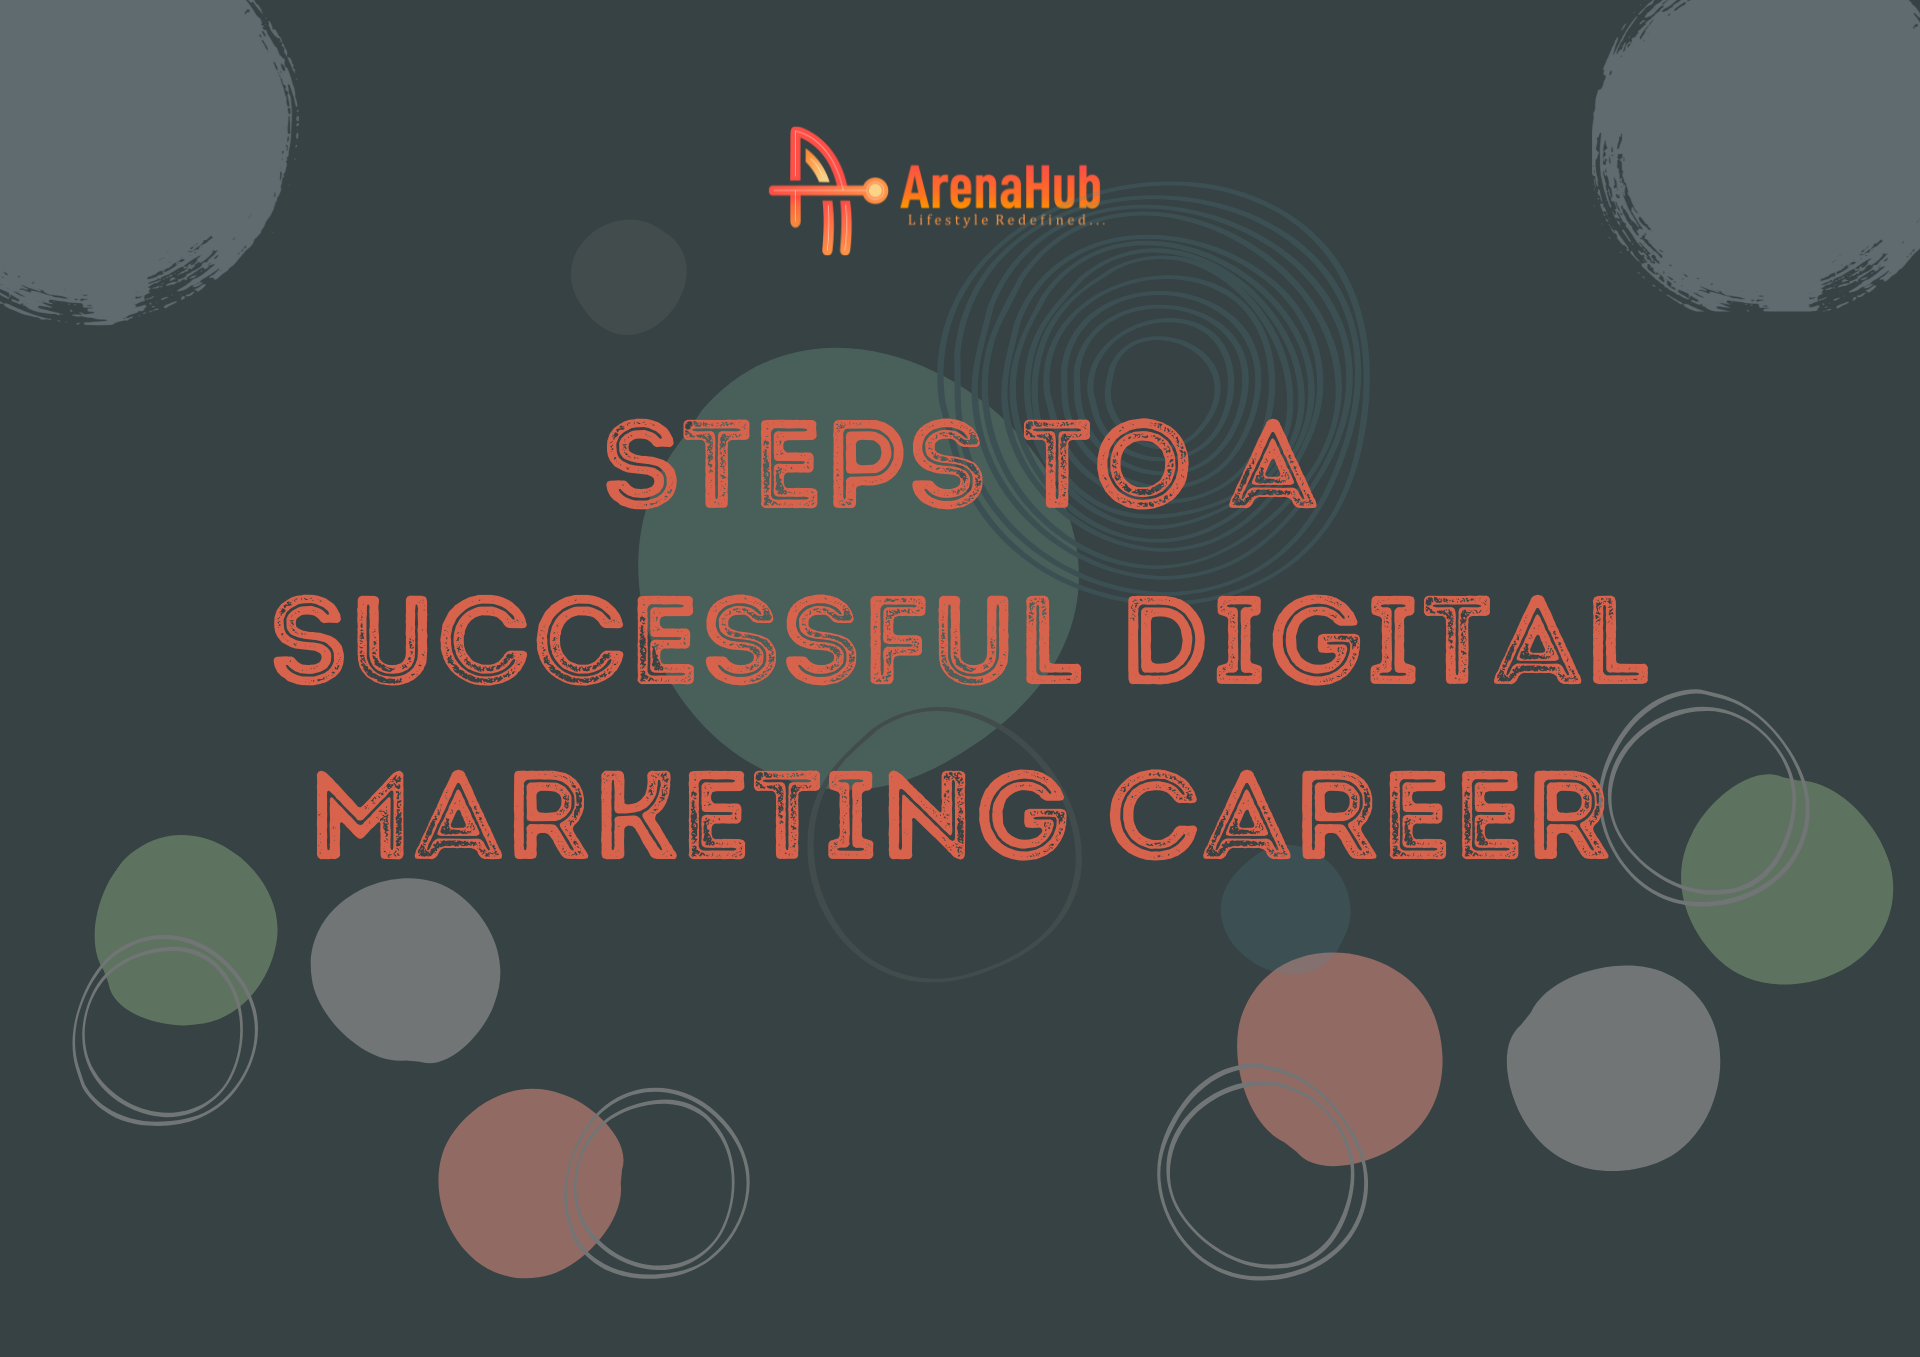 Steps to a Successful Digital Marketing Career